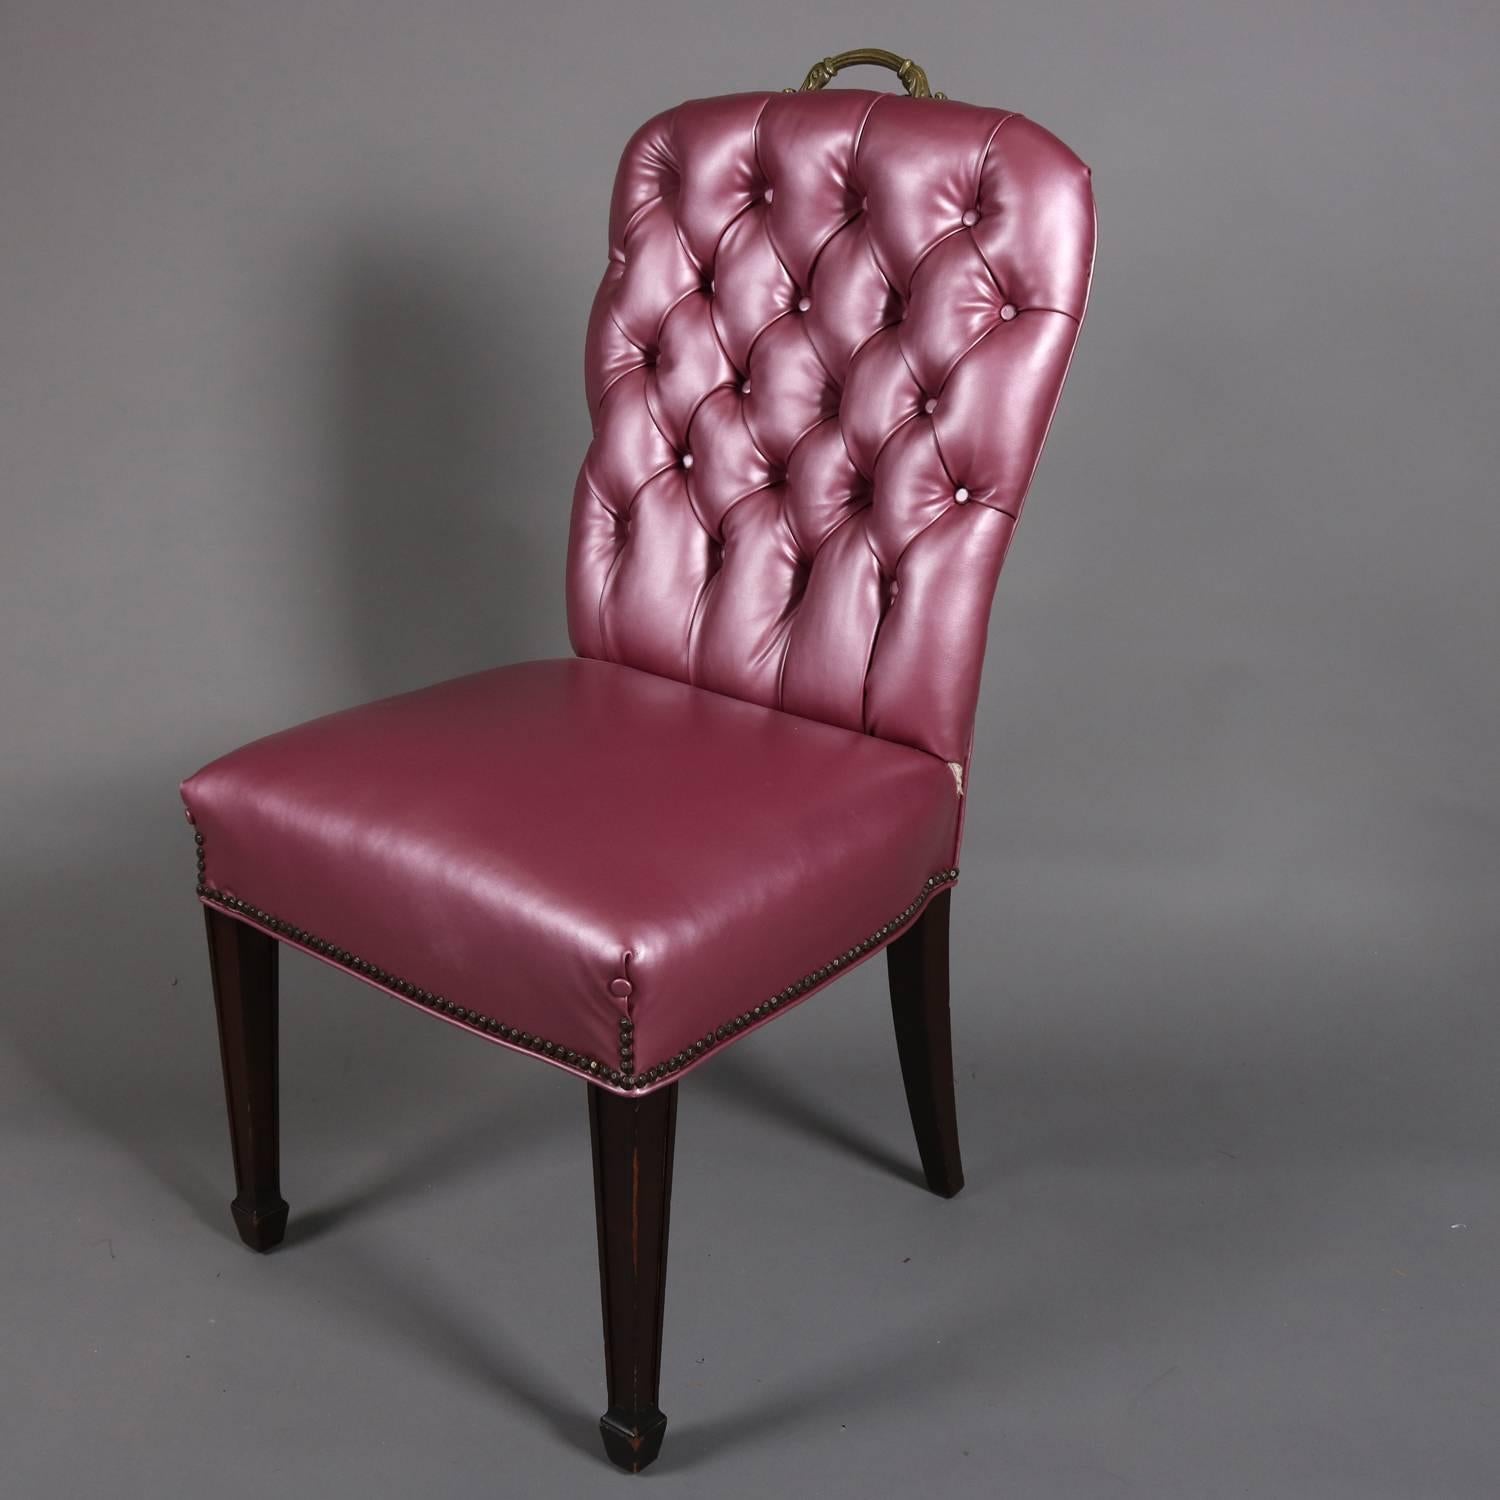 American Set of Four Hollywood Regency Tufted Fuschia Upholstered Side Chairs